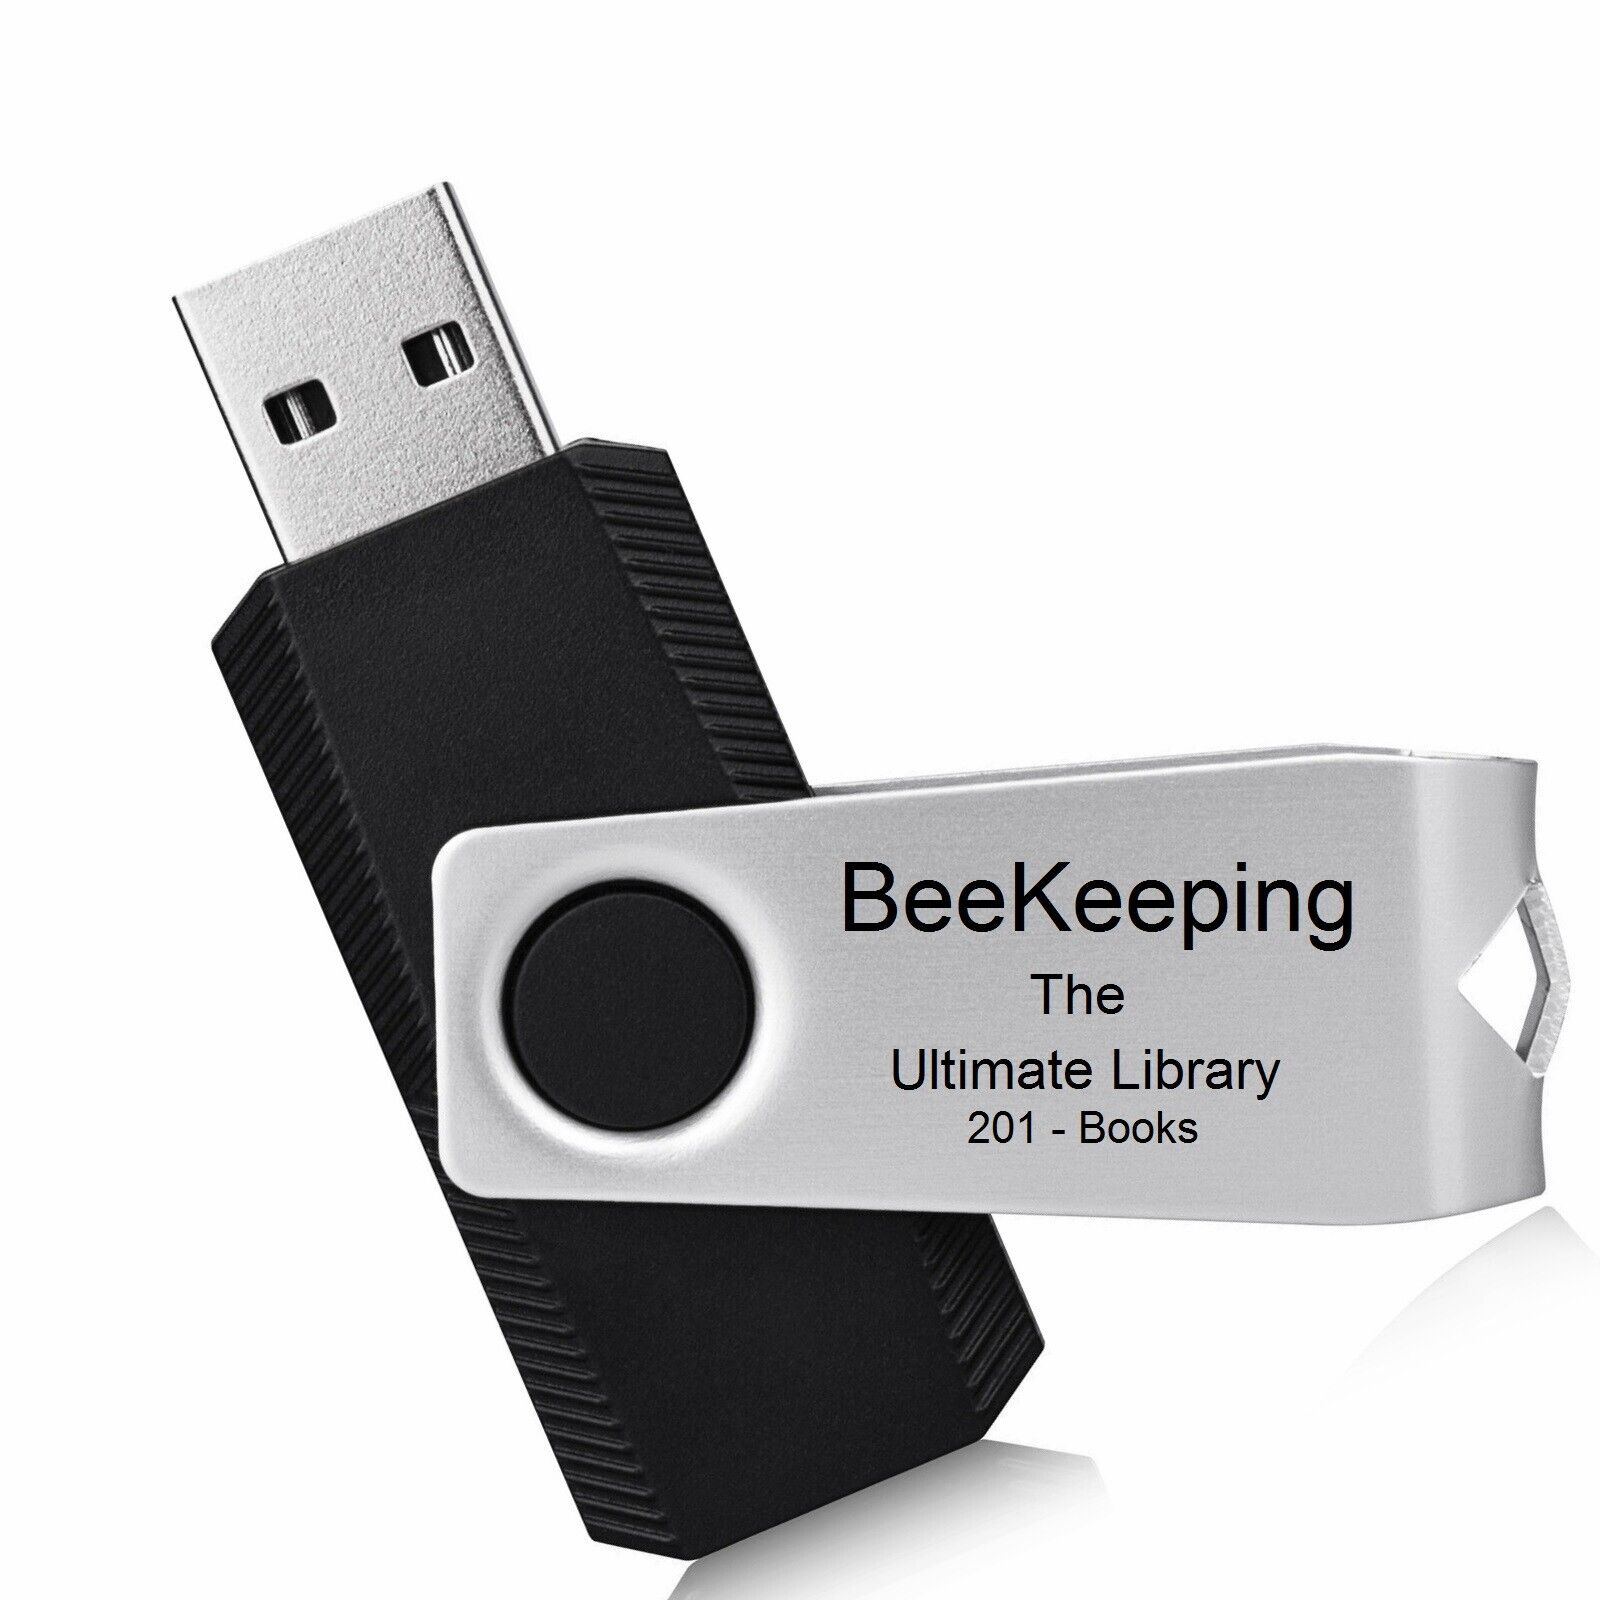 201 Beekeeping Books USB Honey Bees Wax Apiculture Apiary Hives FLASH DRIVE